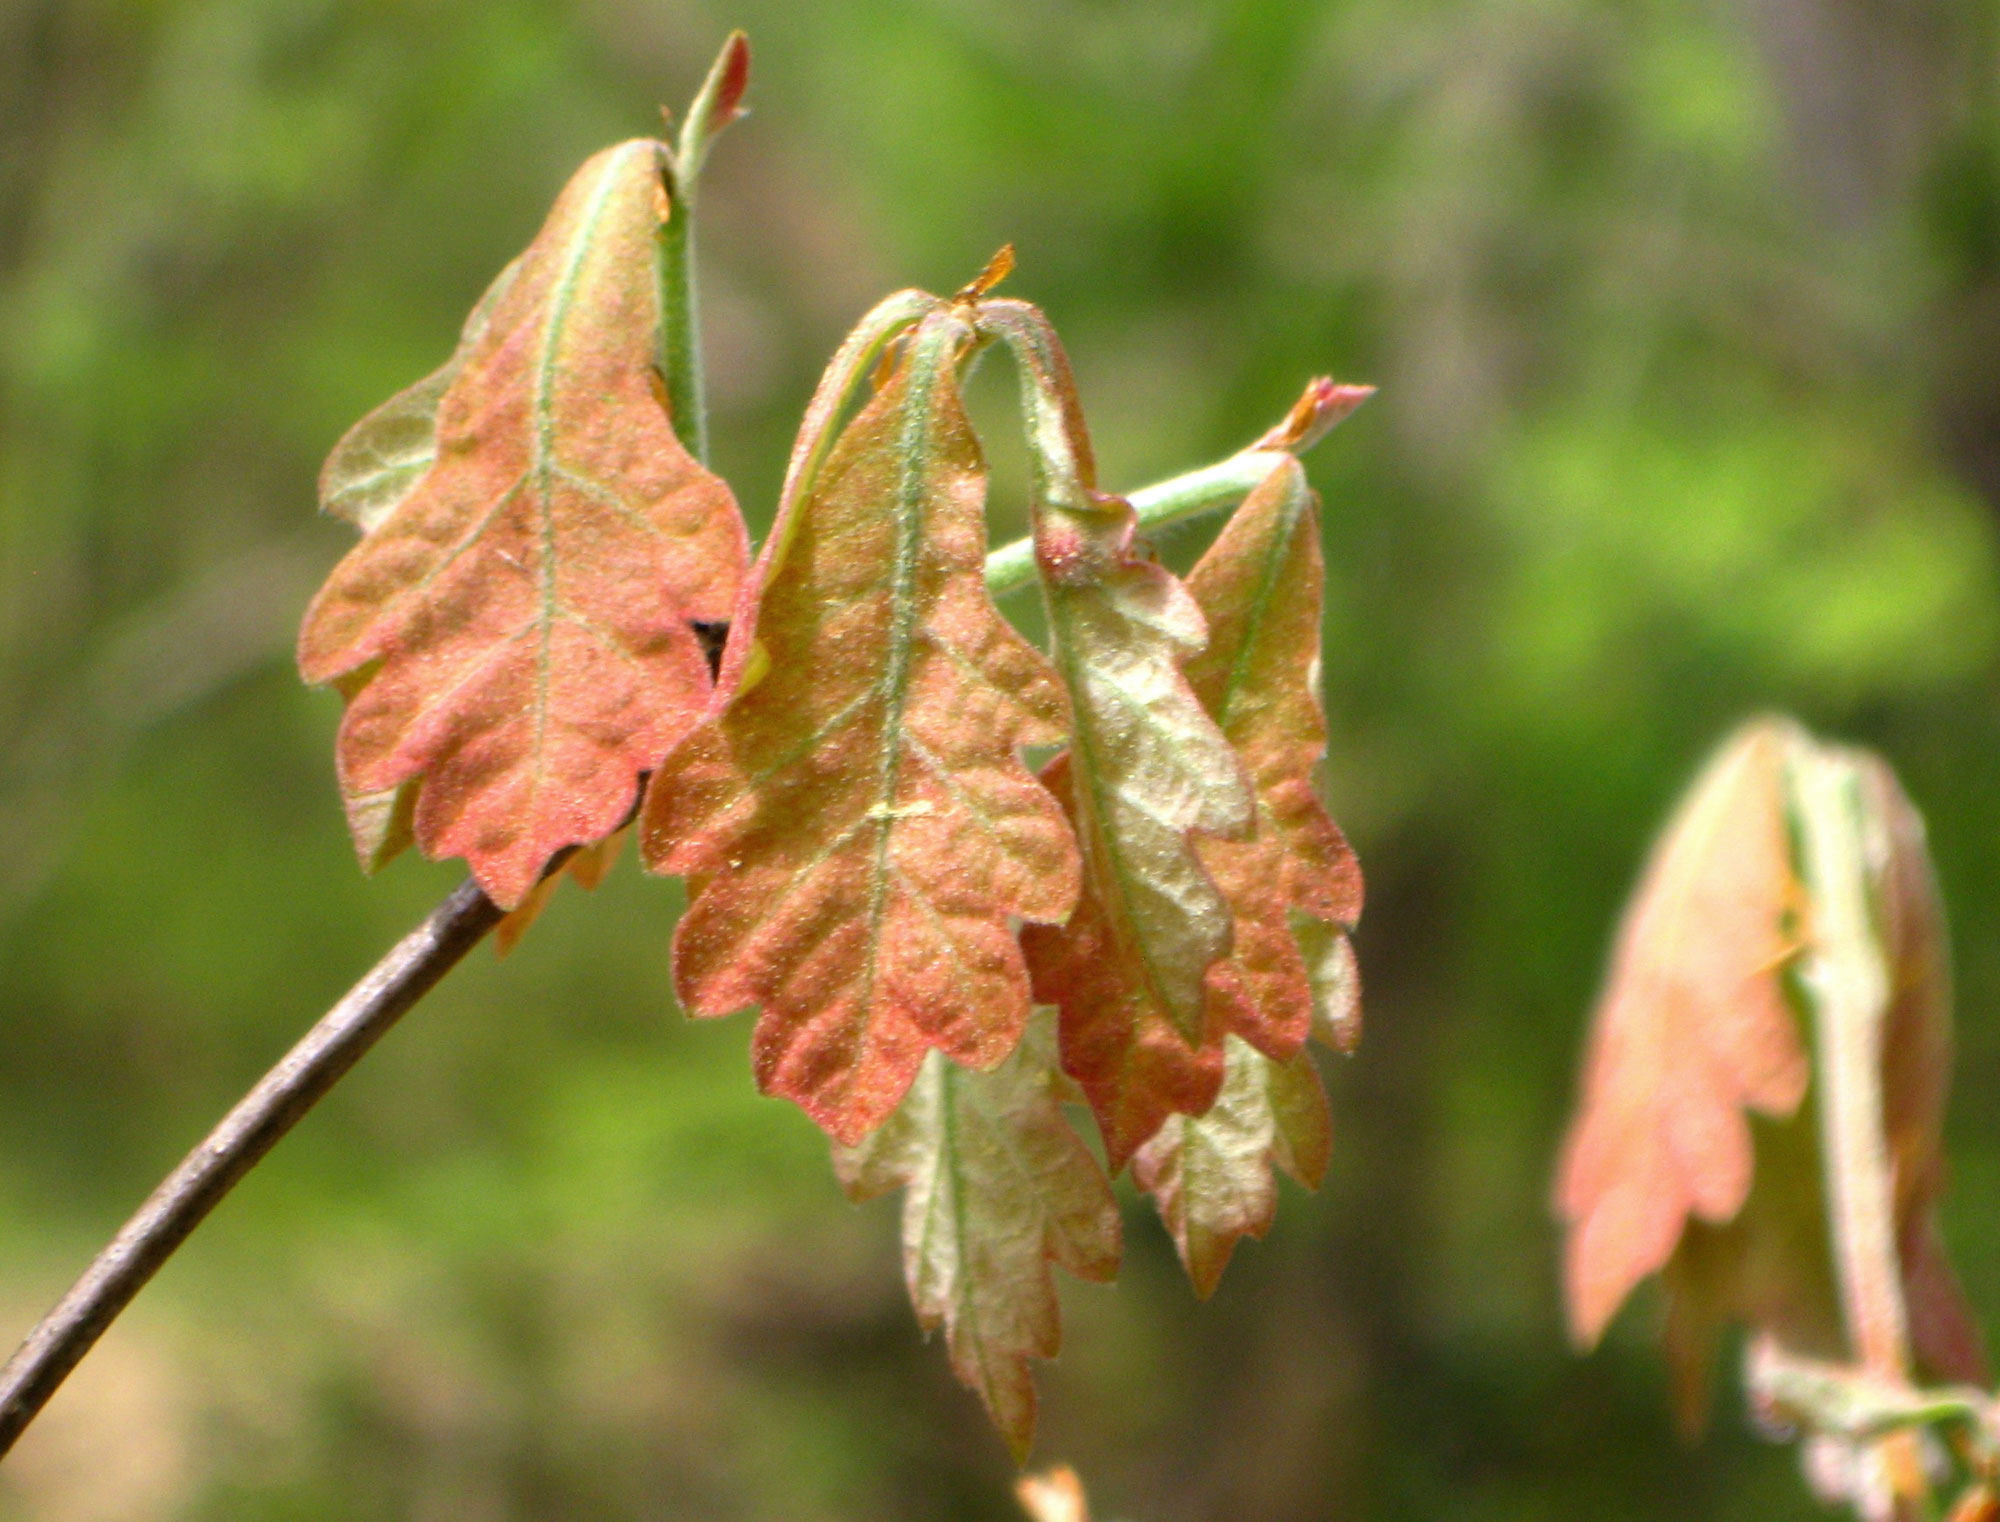 Photograph of immature oak leaves developing on the end of a branch.